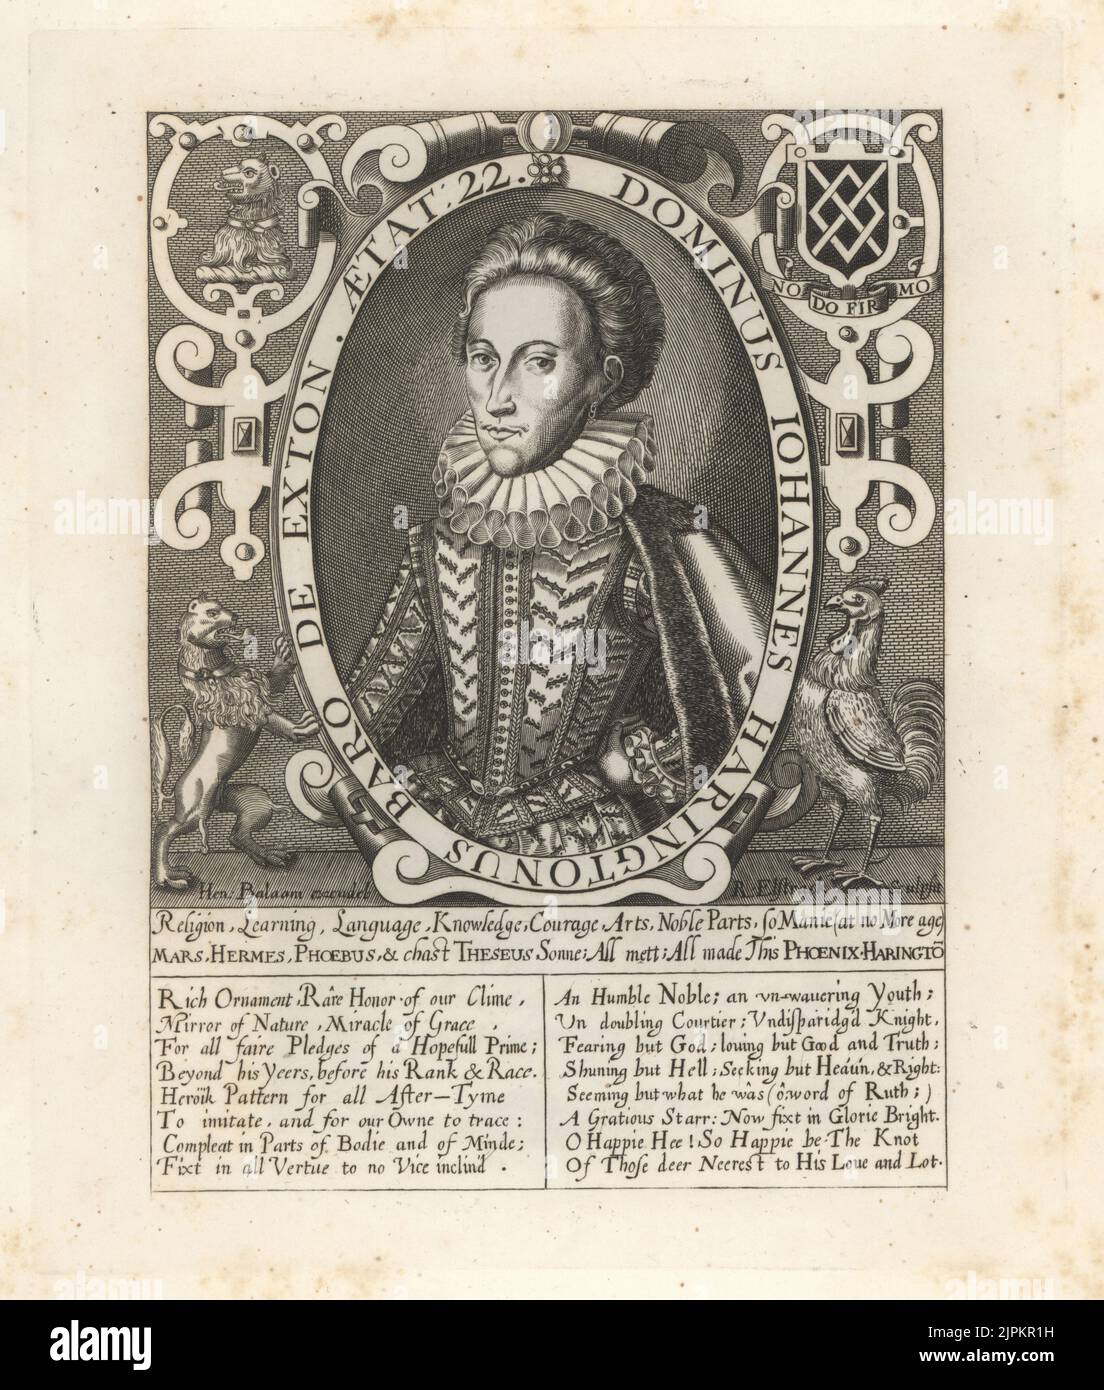 John Harington, 1st Baron Harington of Exton, 1539-1613. English courtier and politician. With earring, in ruff collar, cloak and embroidered doublet, with heraldic figures of lion rampant and cock. Dominus Johannes Haringtonus, Baro de Exton. Copperplate engraving after Renold Elstrack from Samuel Woodburn’s Gallery of Rare Portraits Consisting of Original Plates, George Jones, 102 St Martin’s Lane, London, 1816. Stock Photo